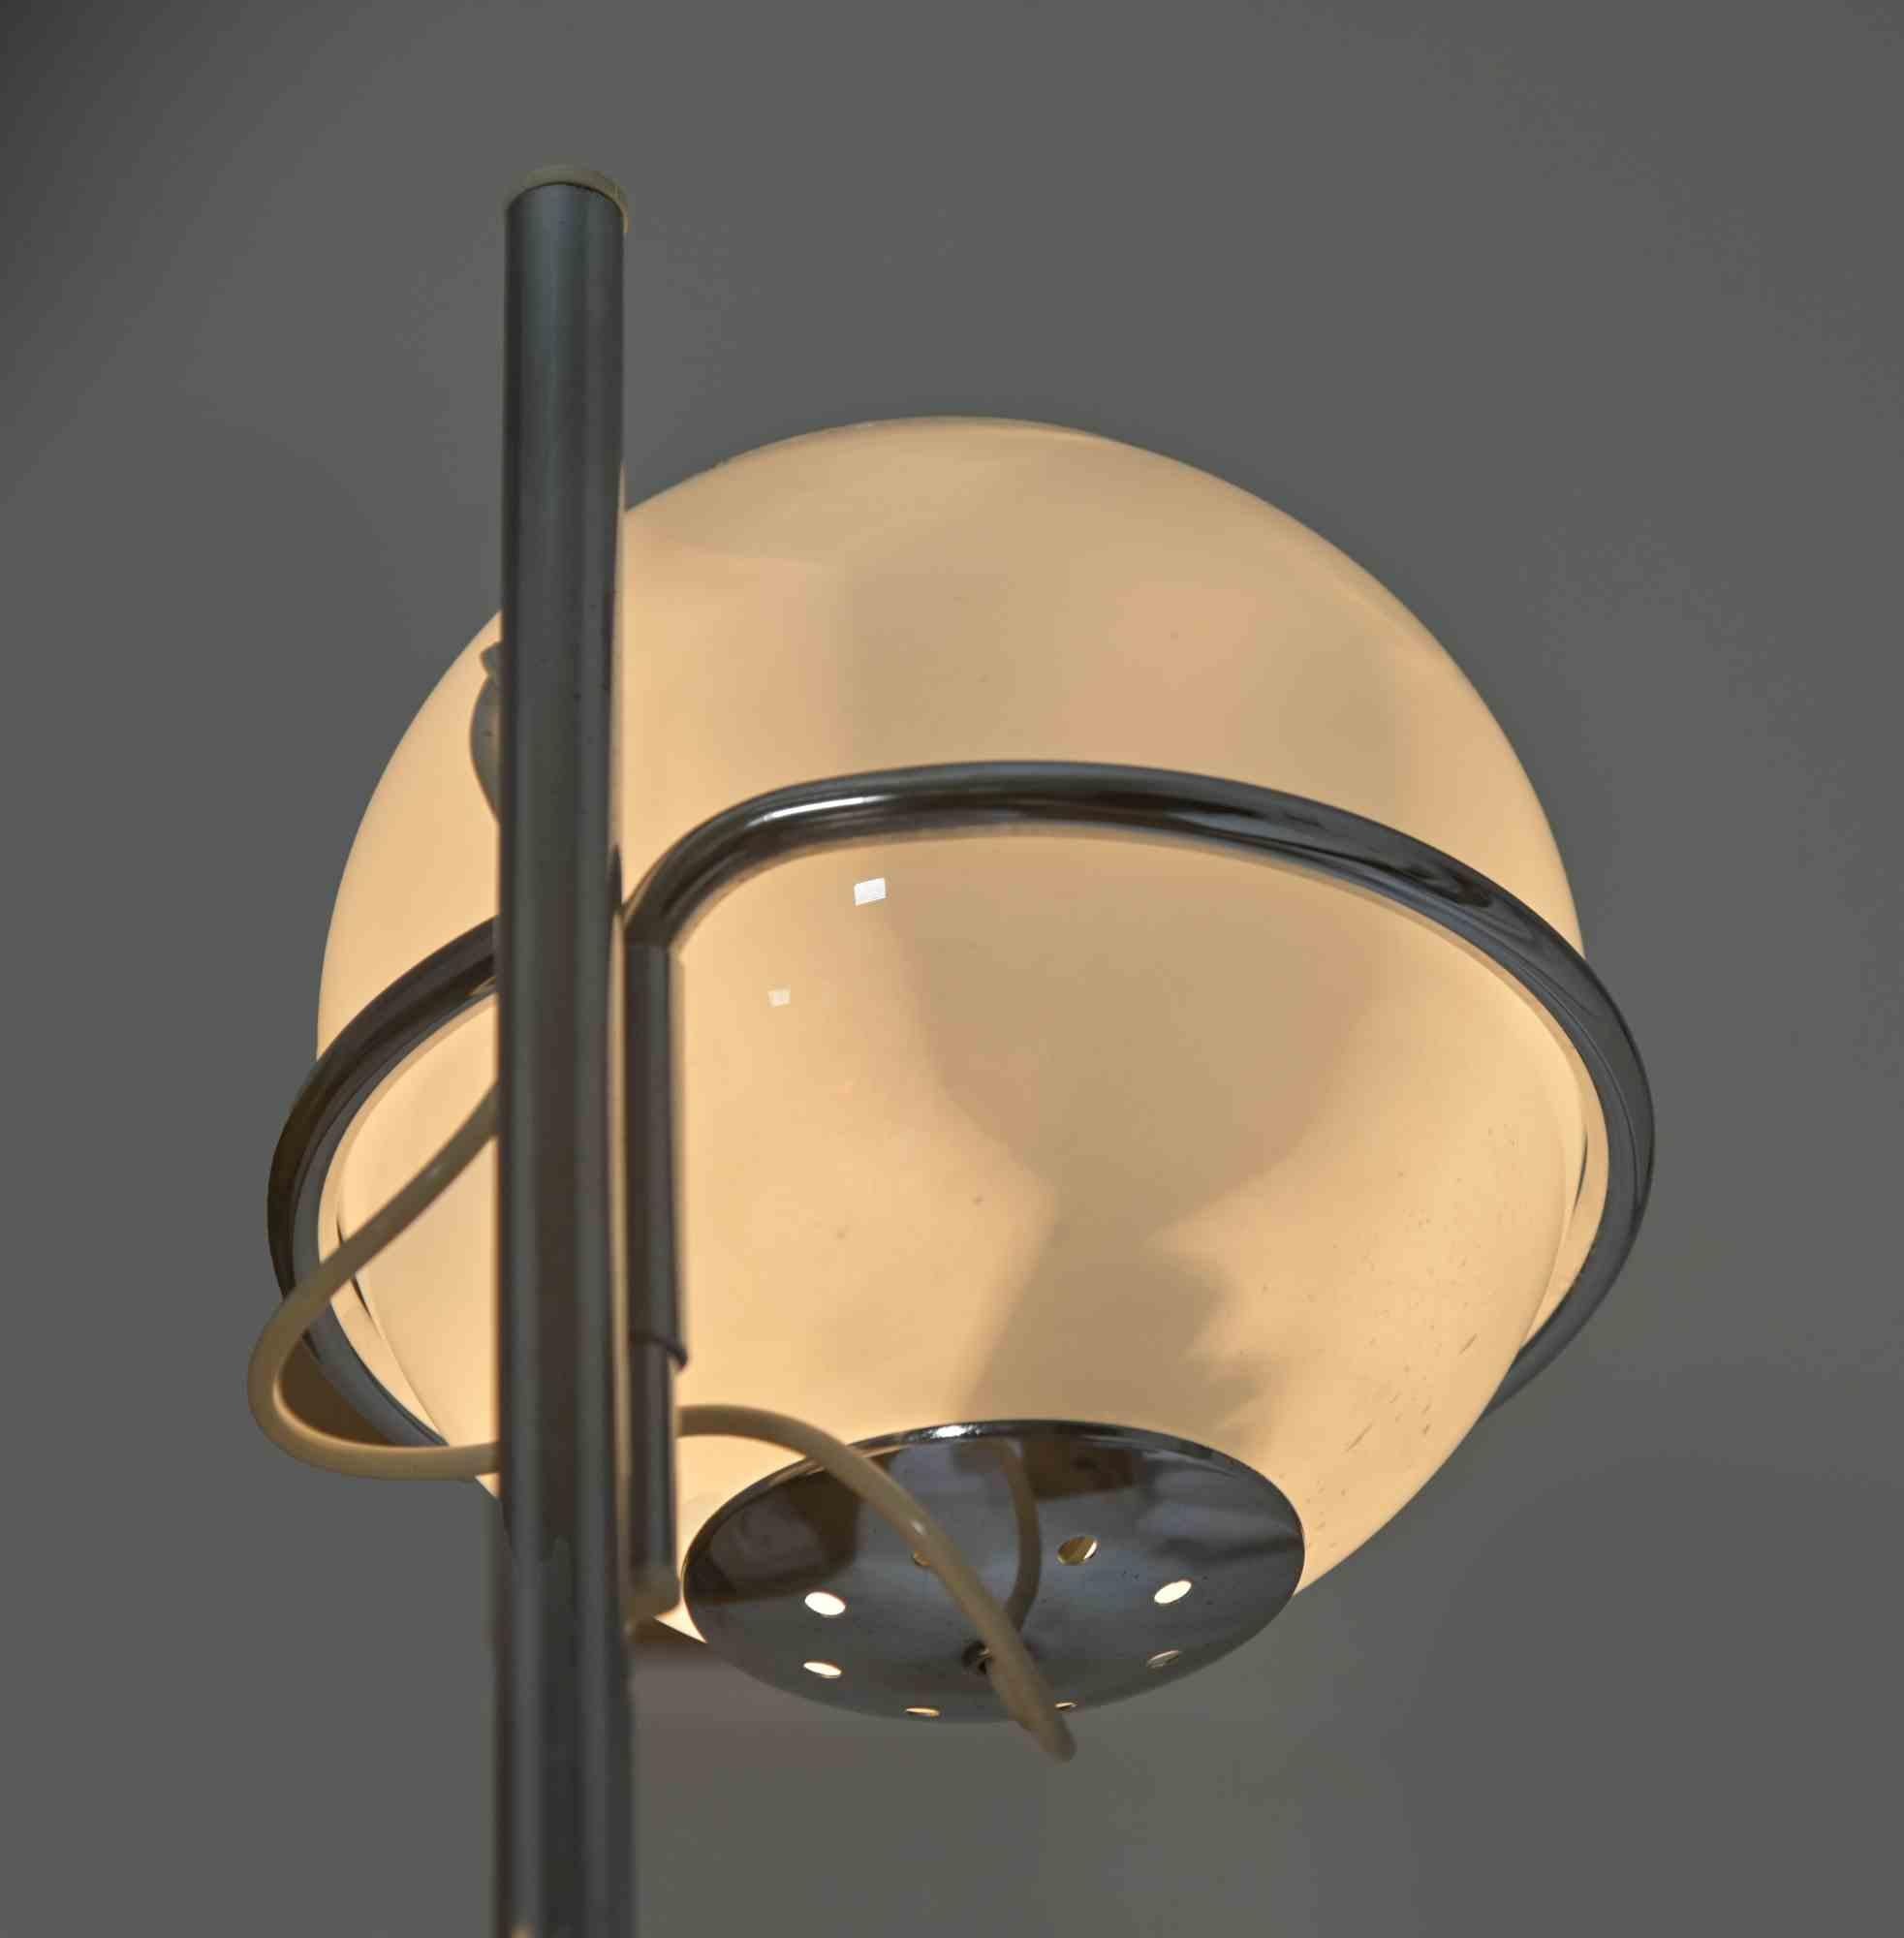 Vintage 1094 Floor Lamp by Gino Sarfatti (1912-1985), realized for Arteluce in 1969.

Carrara Marble Base. Steel structure and independently adjustable milk glass lampshades.

H160 x W50 x D25. 

Good condition, fully Working. Rewireable for